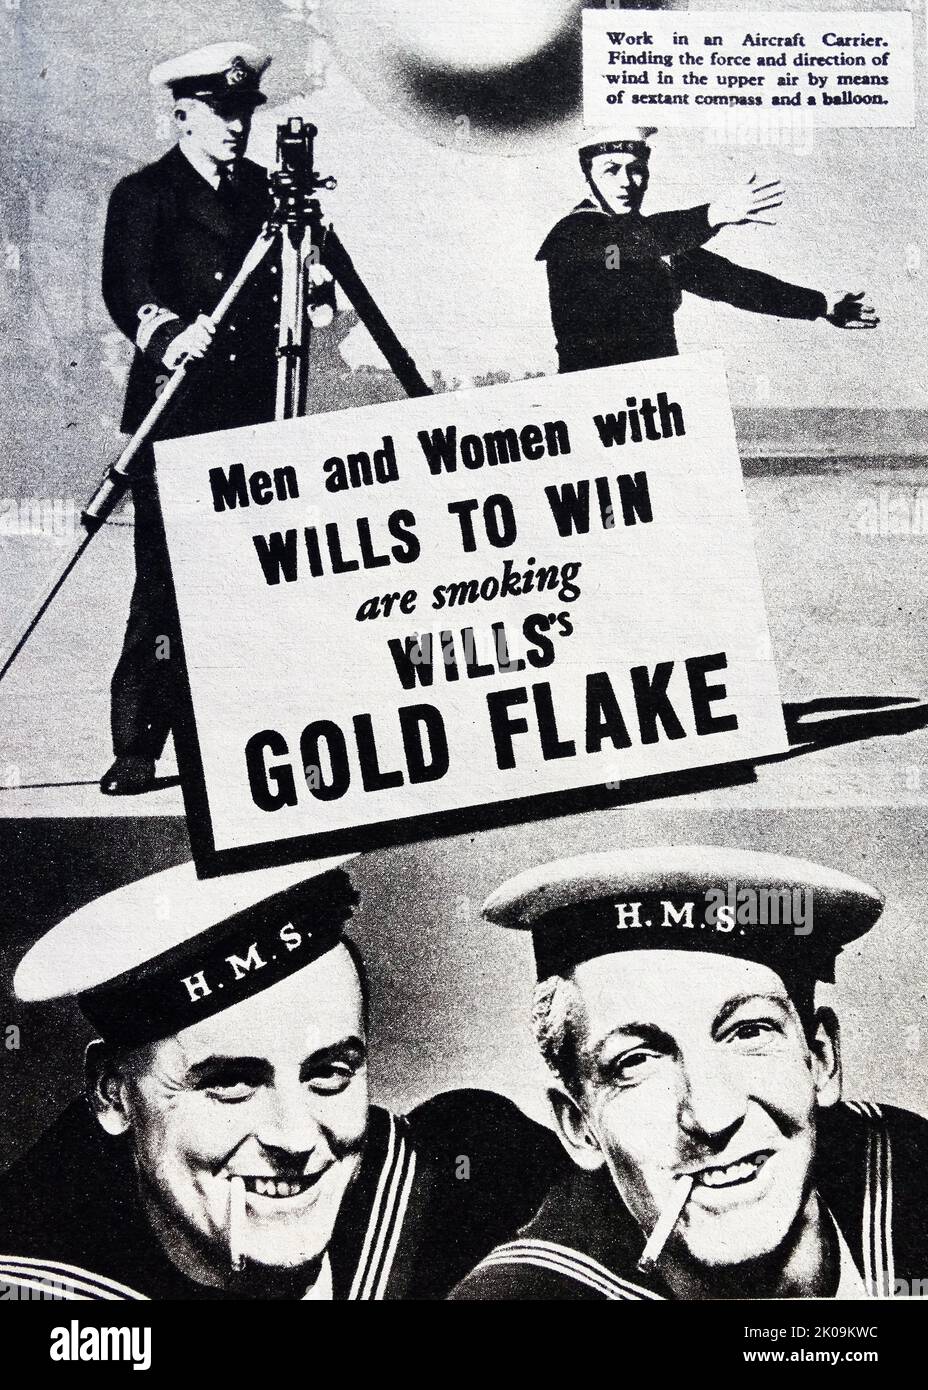 Newspaper advertisement for Wills's Gold Flake cigarettes using navy as promotion. Stock Photo